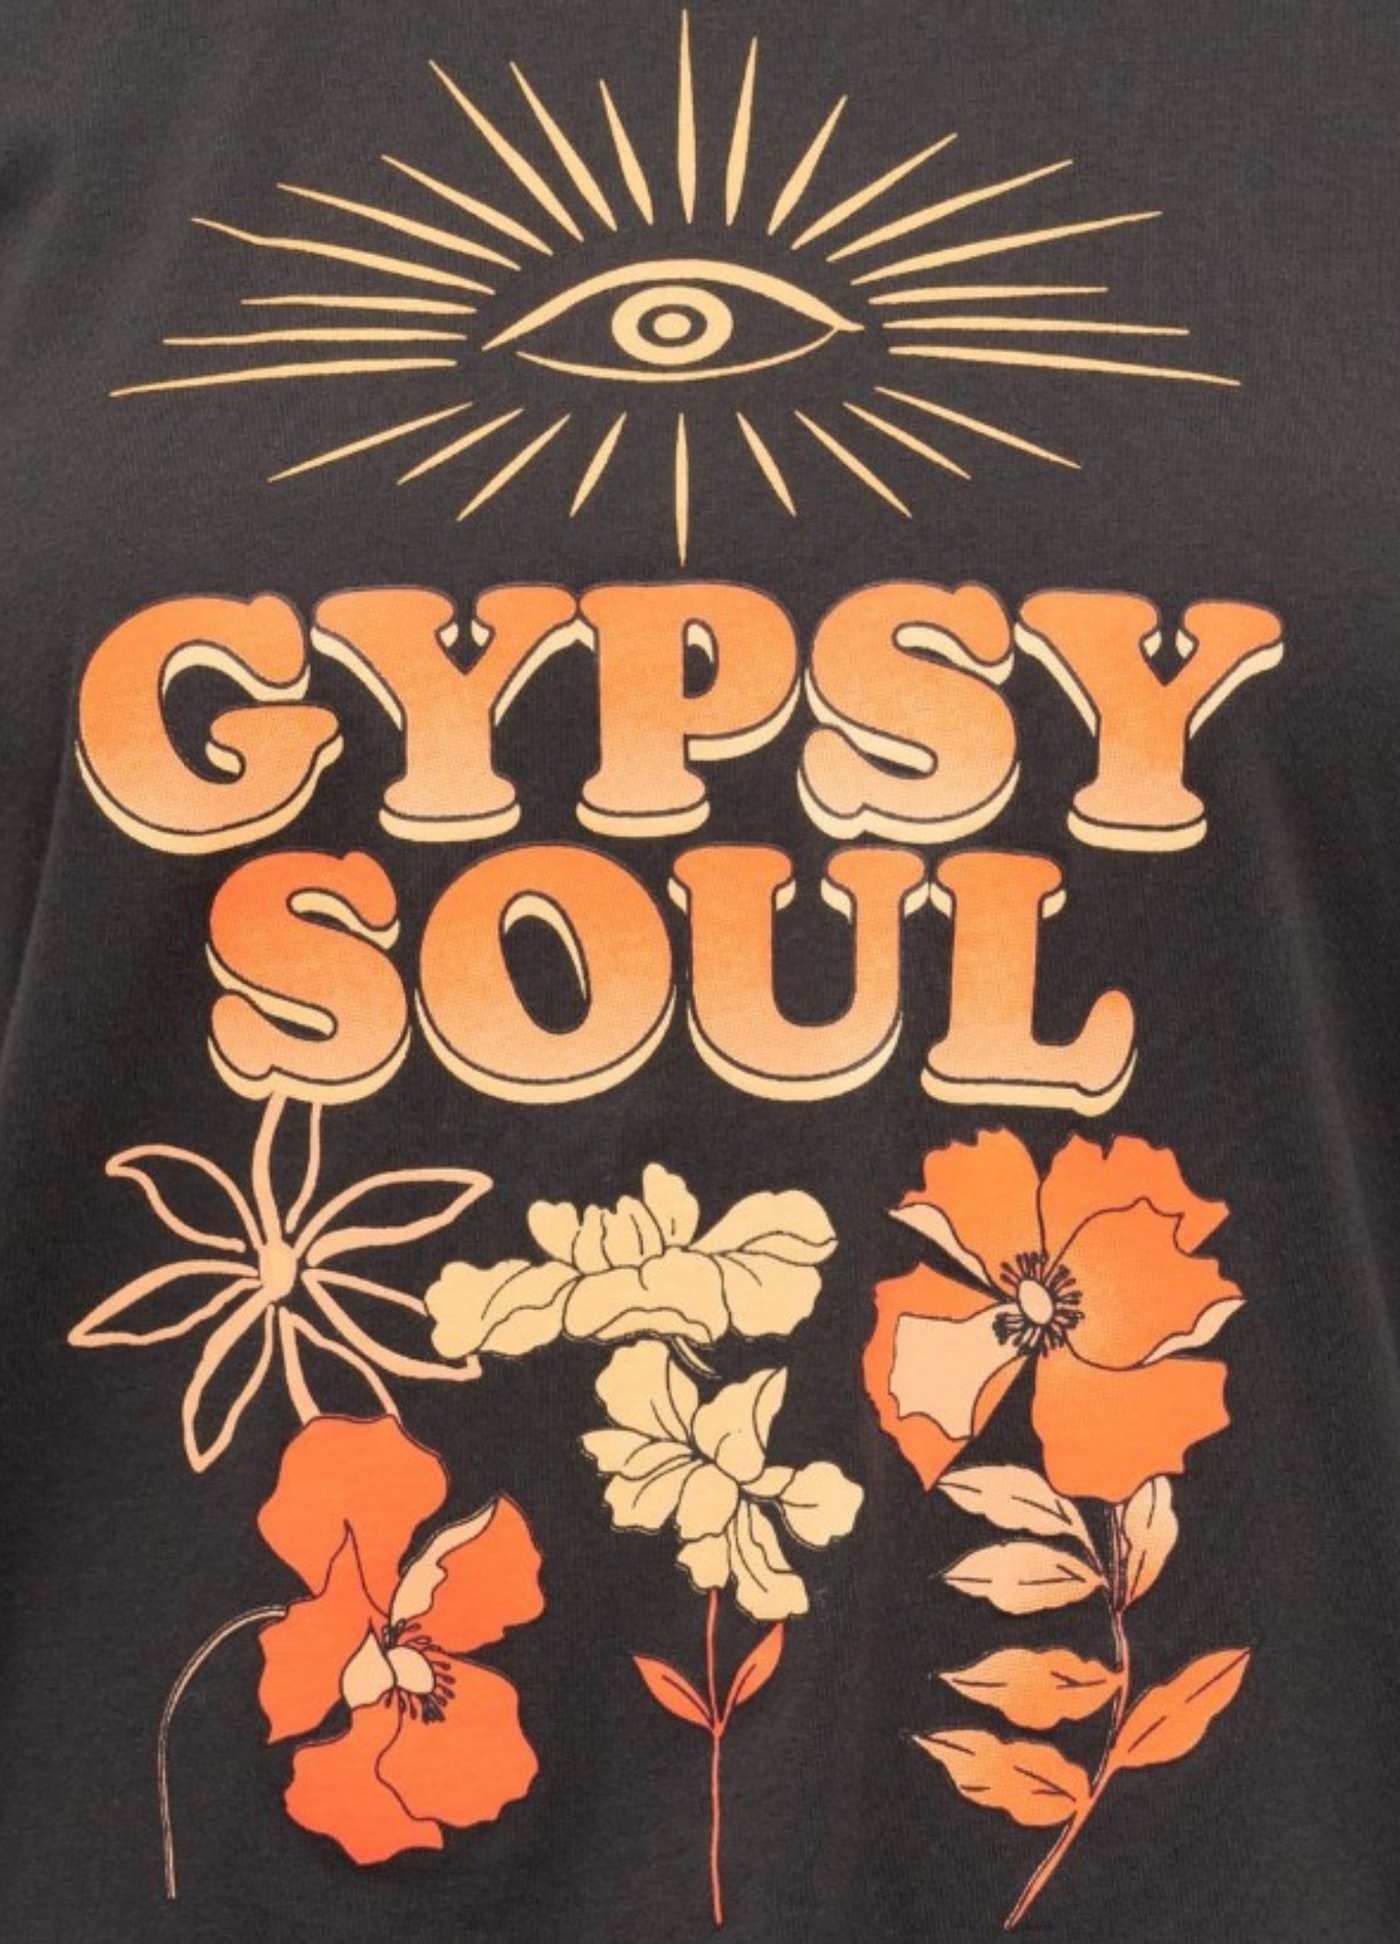 Paper Heart - Short Sleeve Gypsy Soul Tee - Washed Black